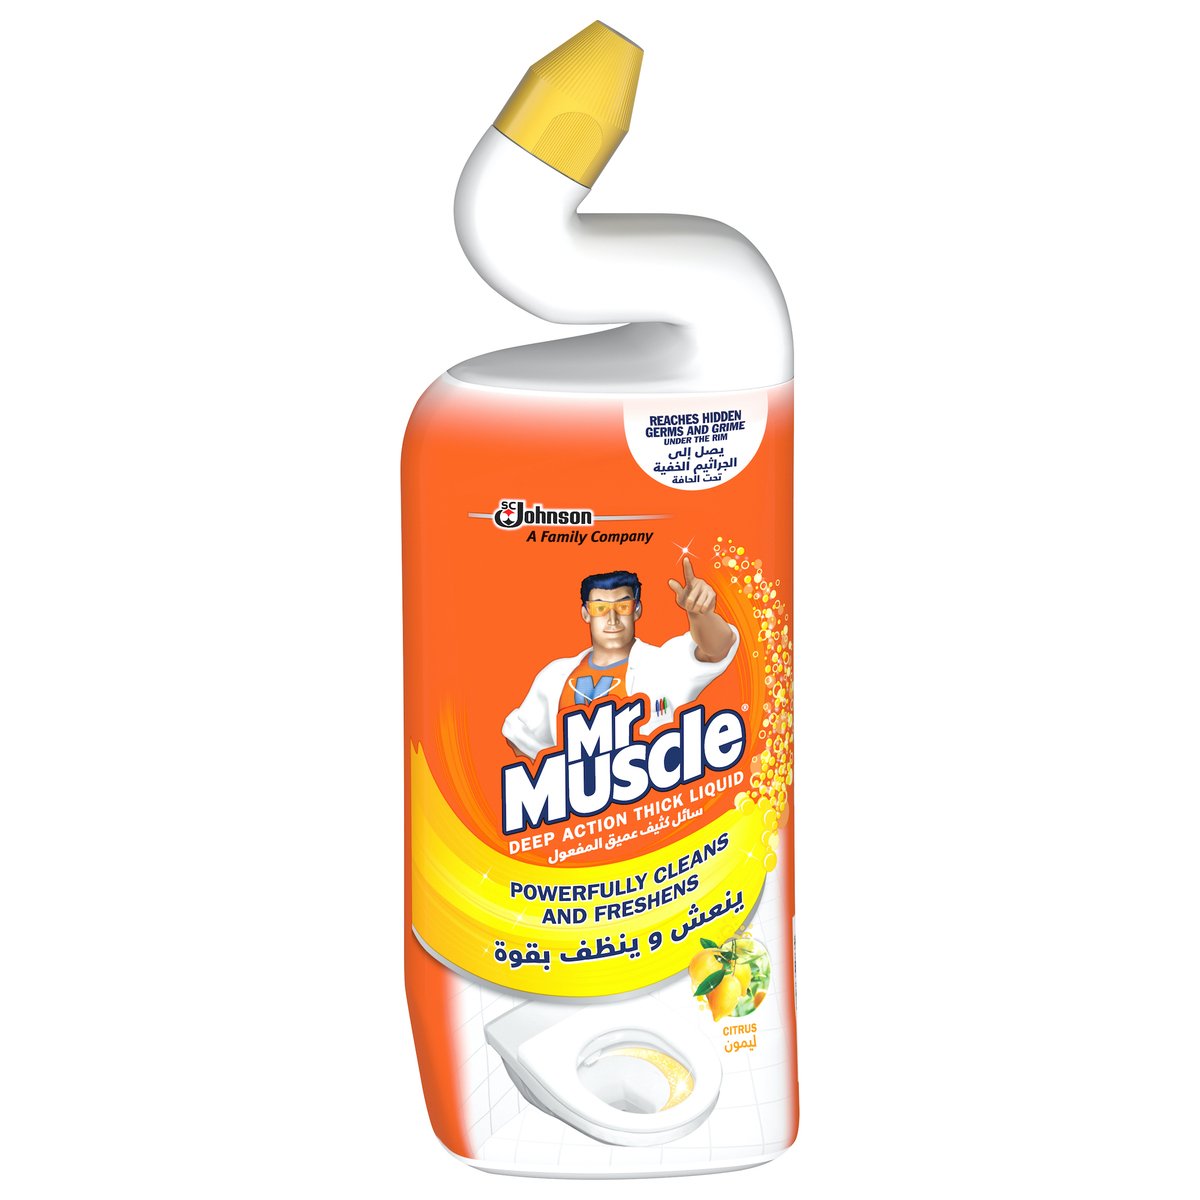 Mr Muscle Platinum Antibacterial Citrus Kitchen Cleaning Spray 750ml